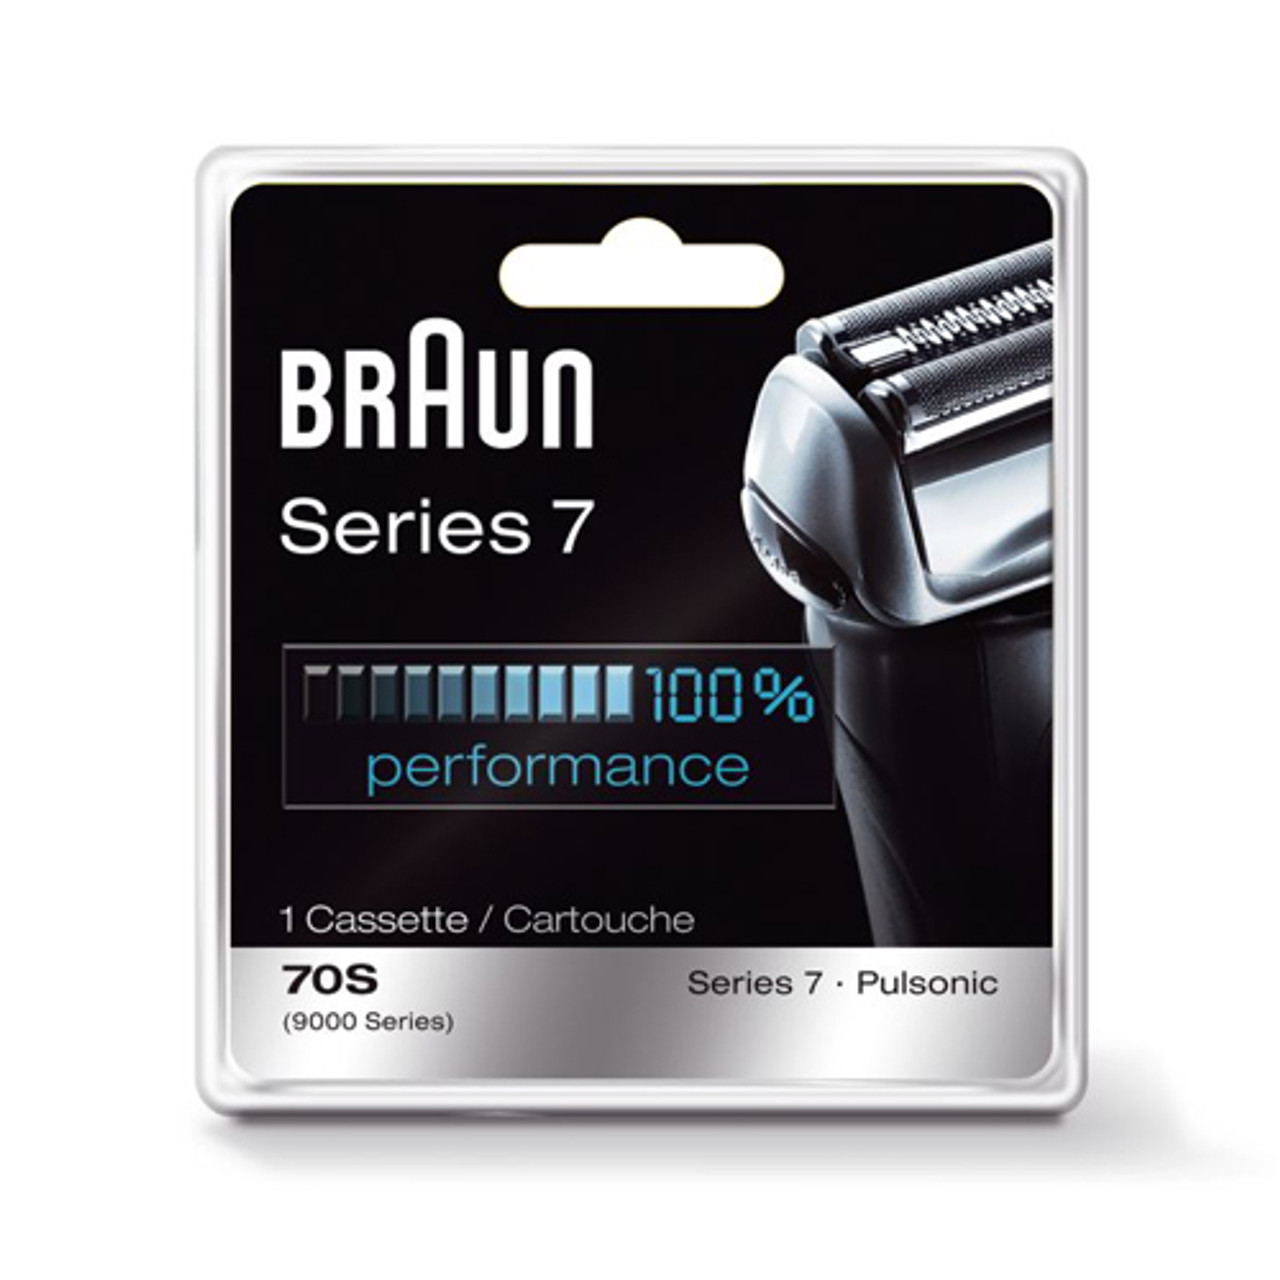 Braun Series 7 Shaver Replacement foil and cutter blade Braun Shaver Part  Number 70s for Braun